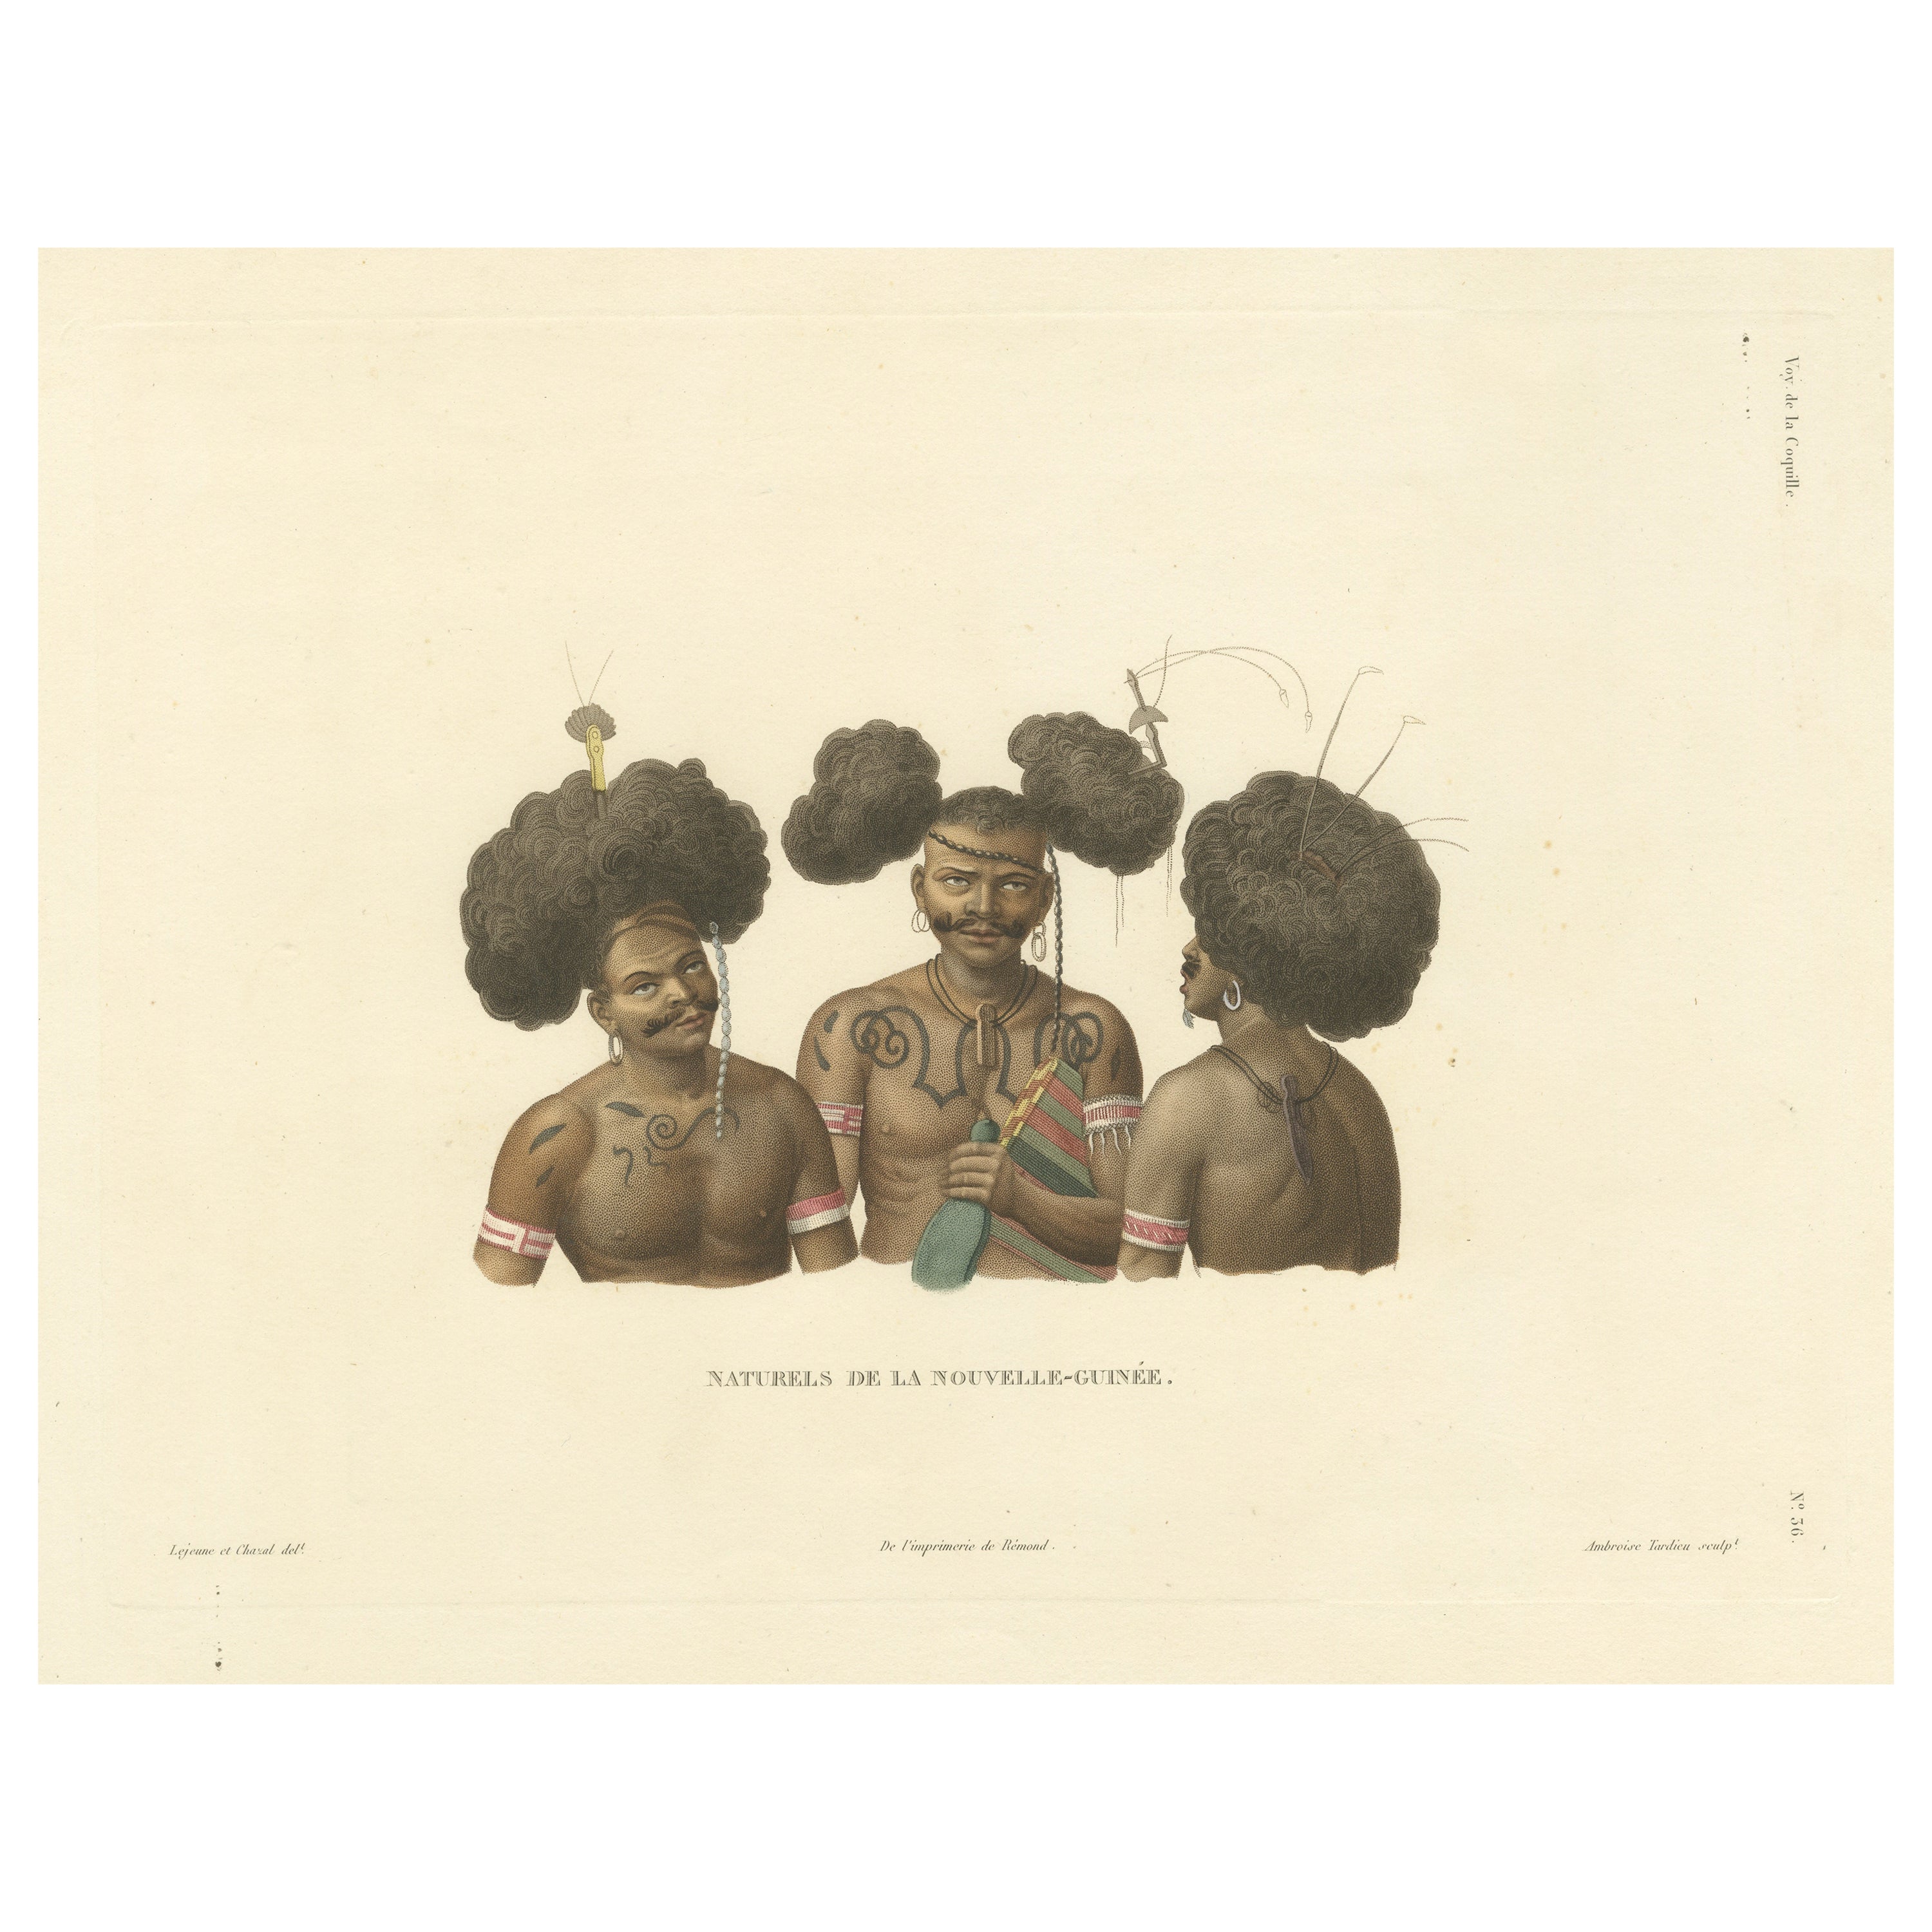 Antique Print of Natives of New Guinea